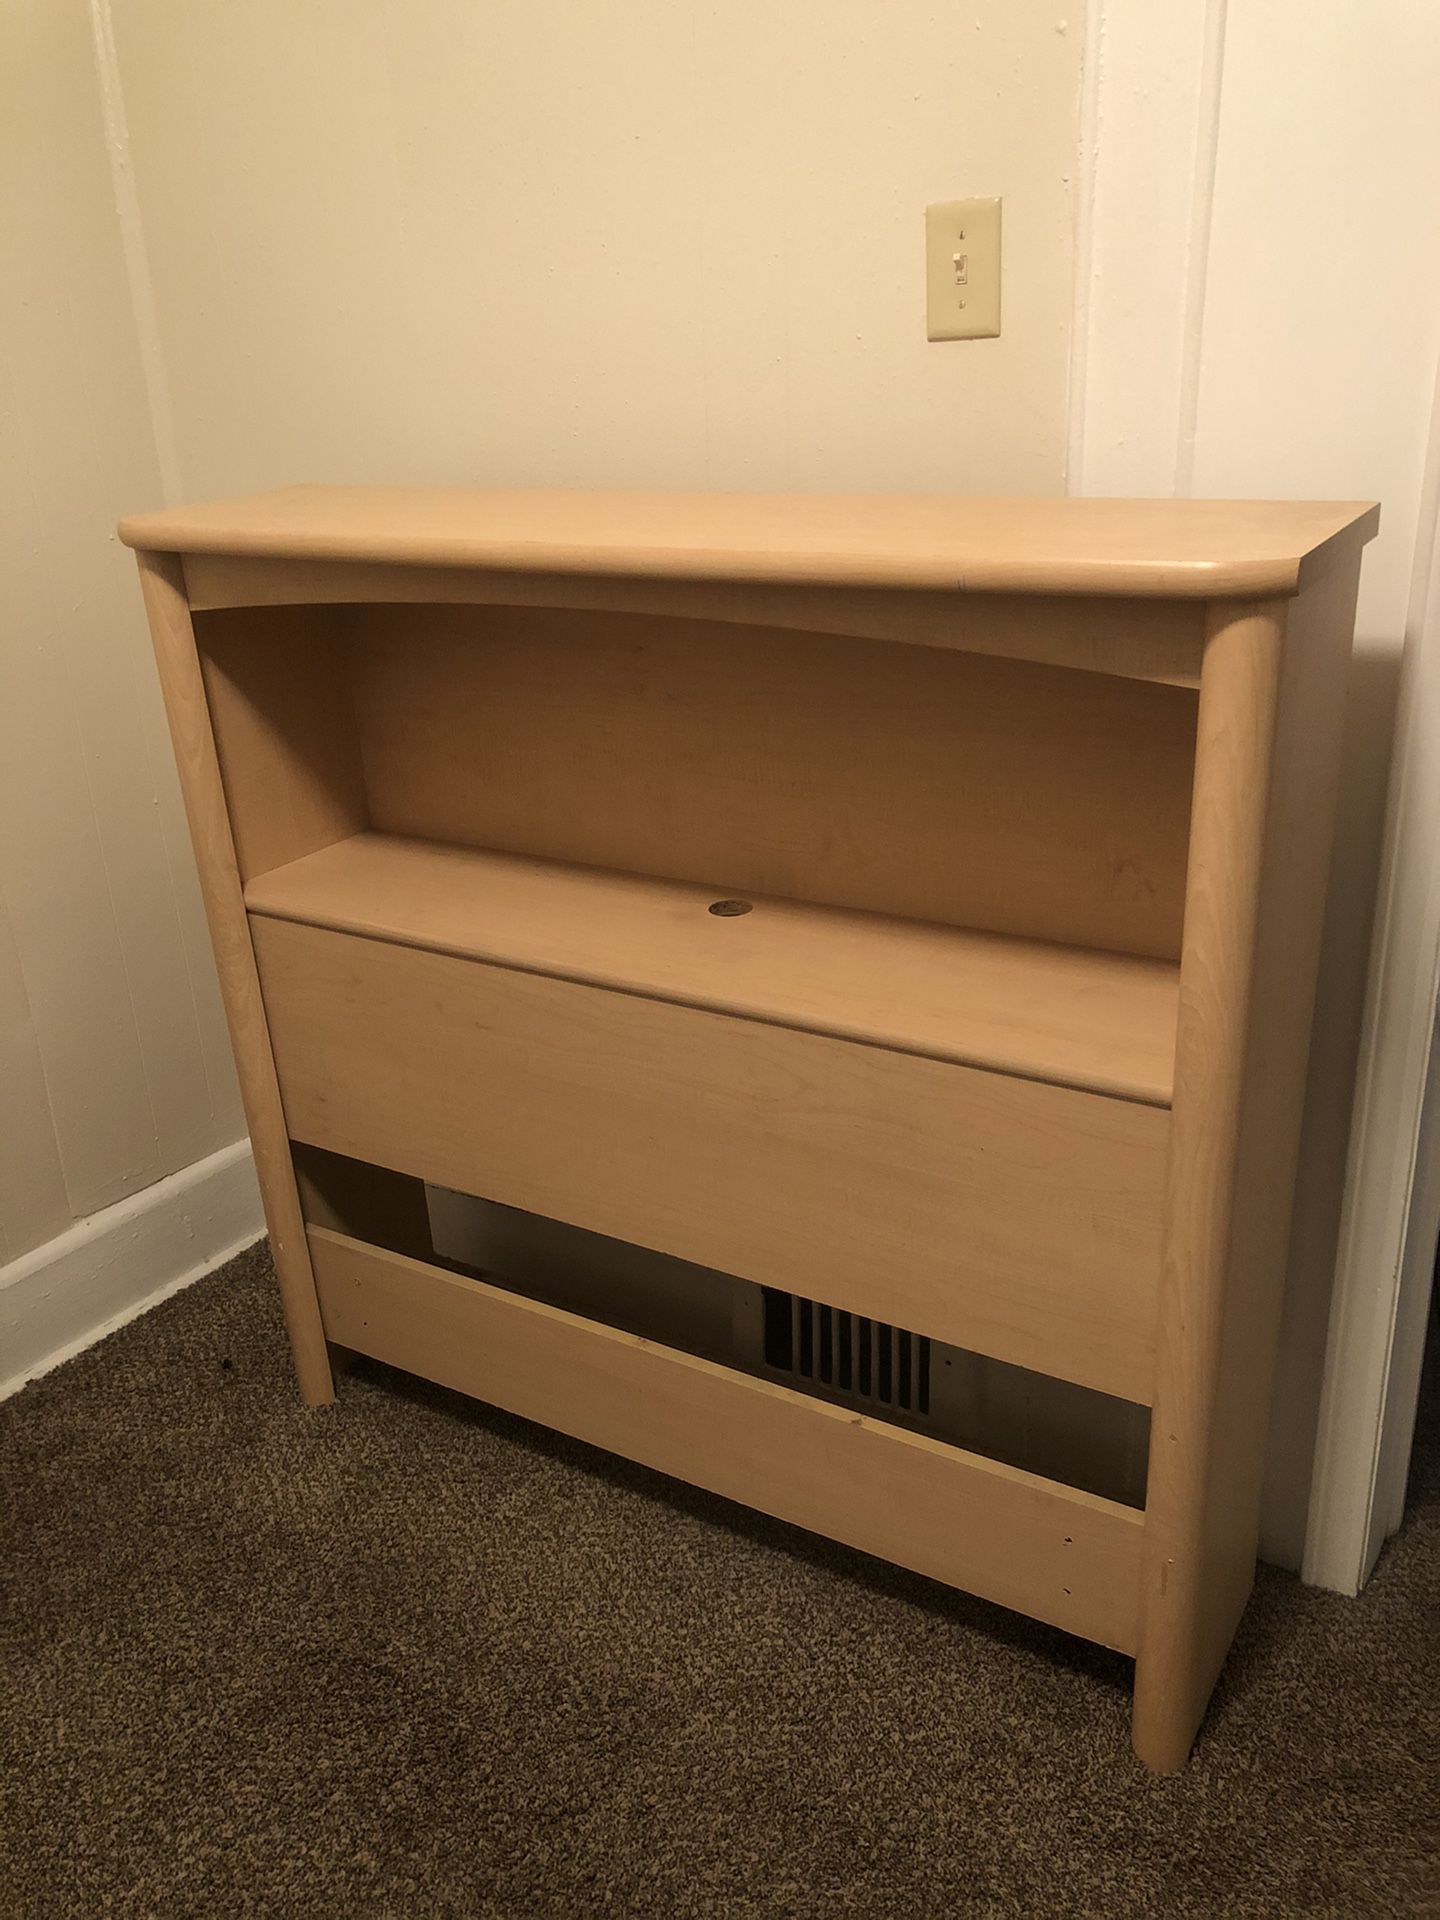 Twin size bed frame with 3 drawers built in